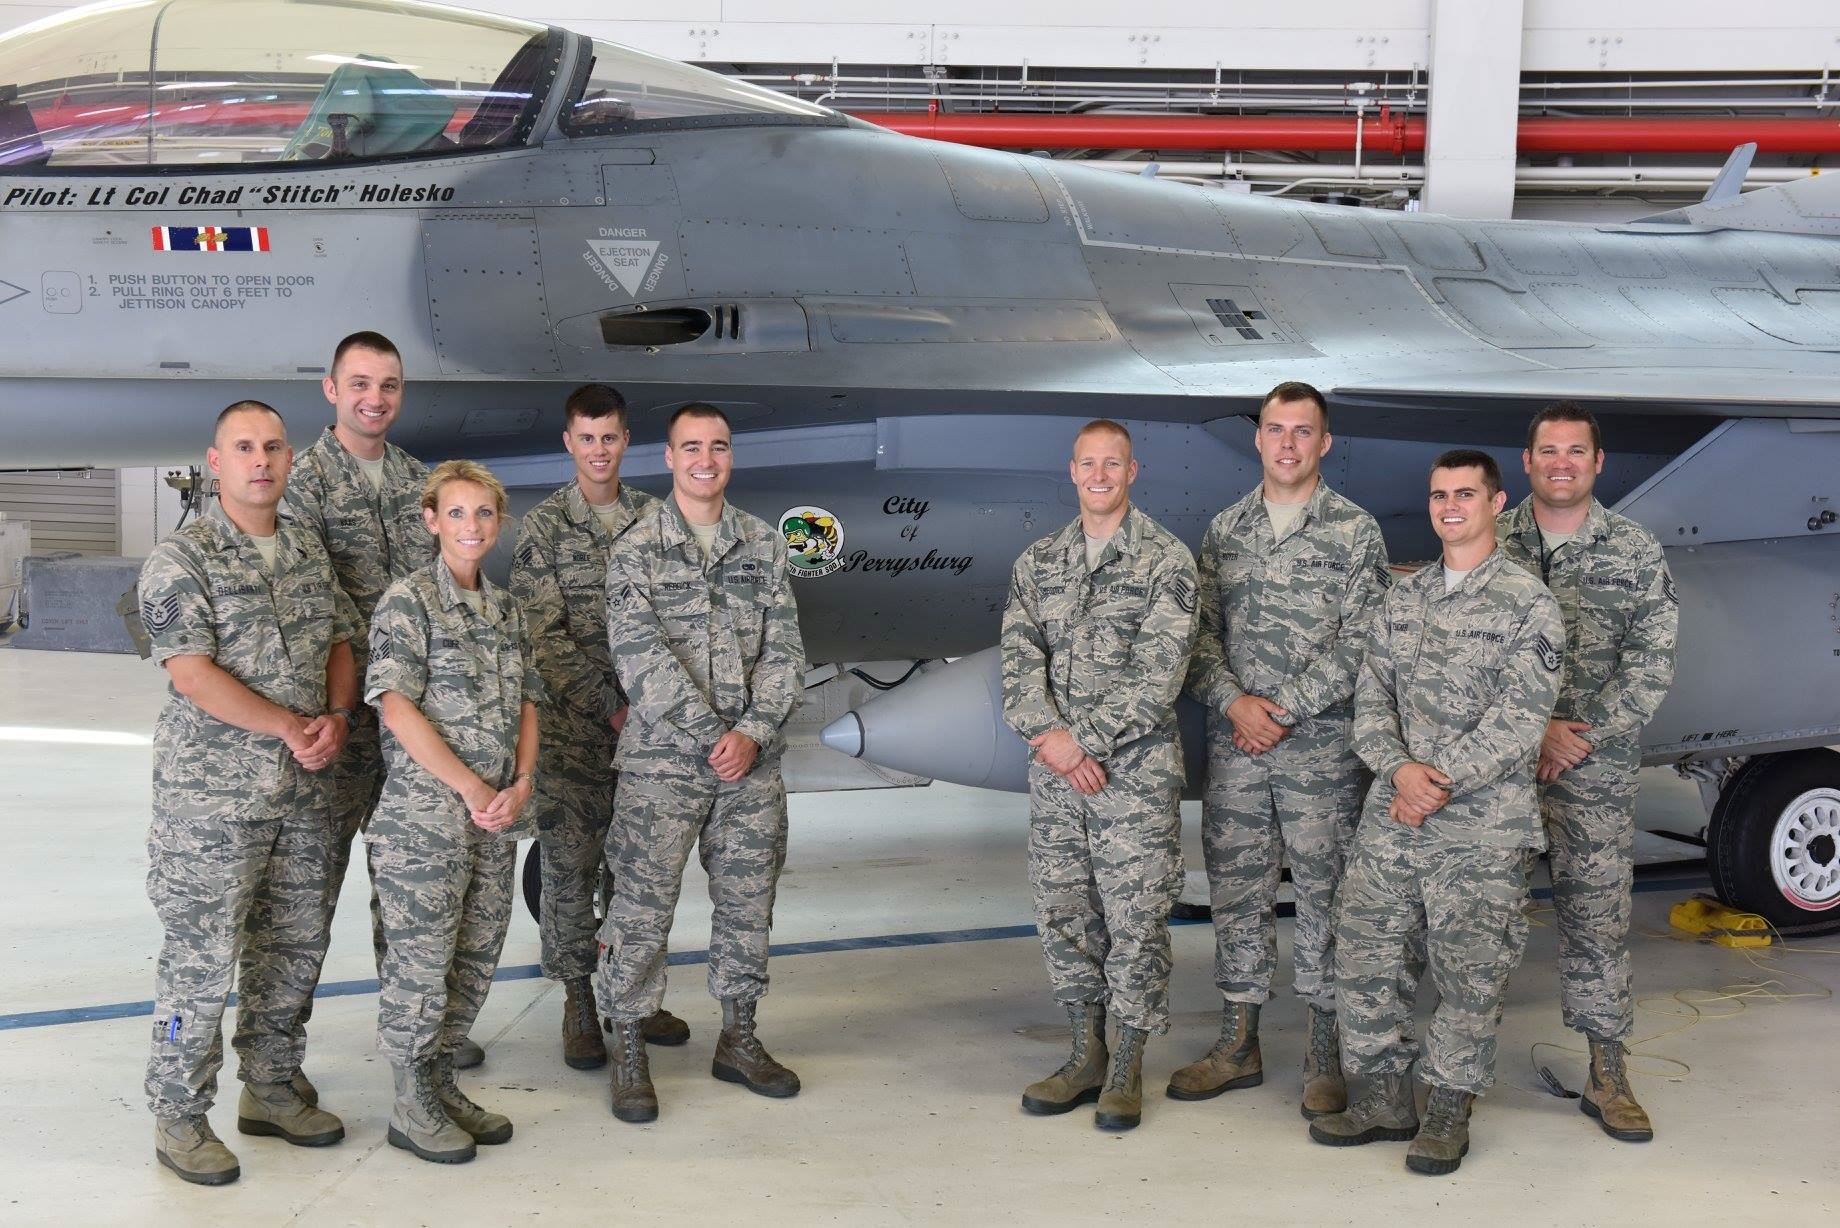 180th-fighter-wing-group-photo